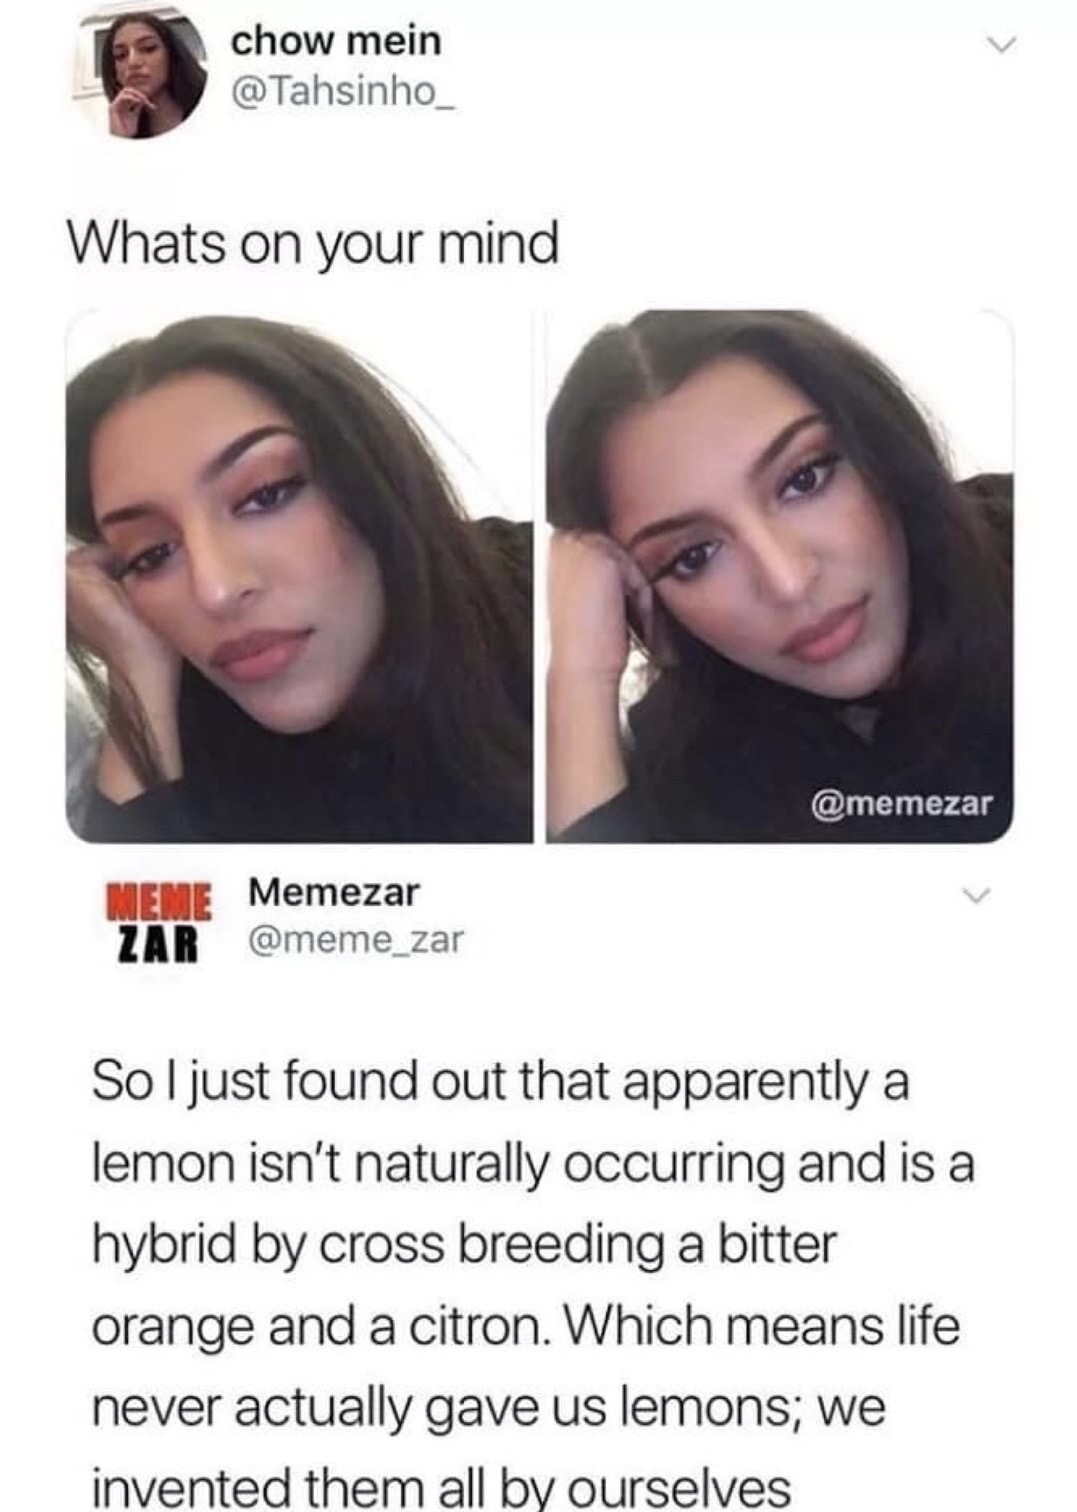 memezar memes - chow mein Whats on your mind Meme Memezar Zar So I just found out that apparently a lemon isn't naturally occurring and is a hybrid by cross breeding a bitter orange and a citron. Which means life never actually gave us lemons; we invented